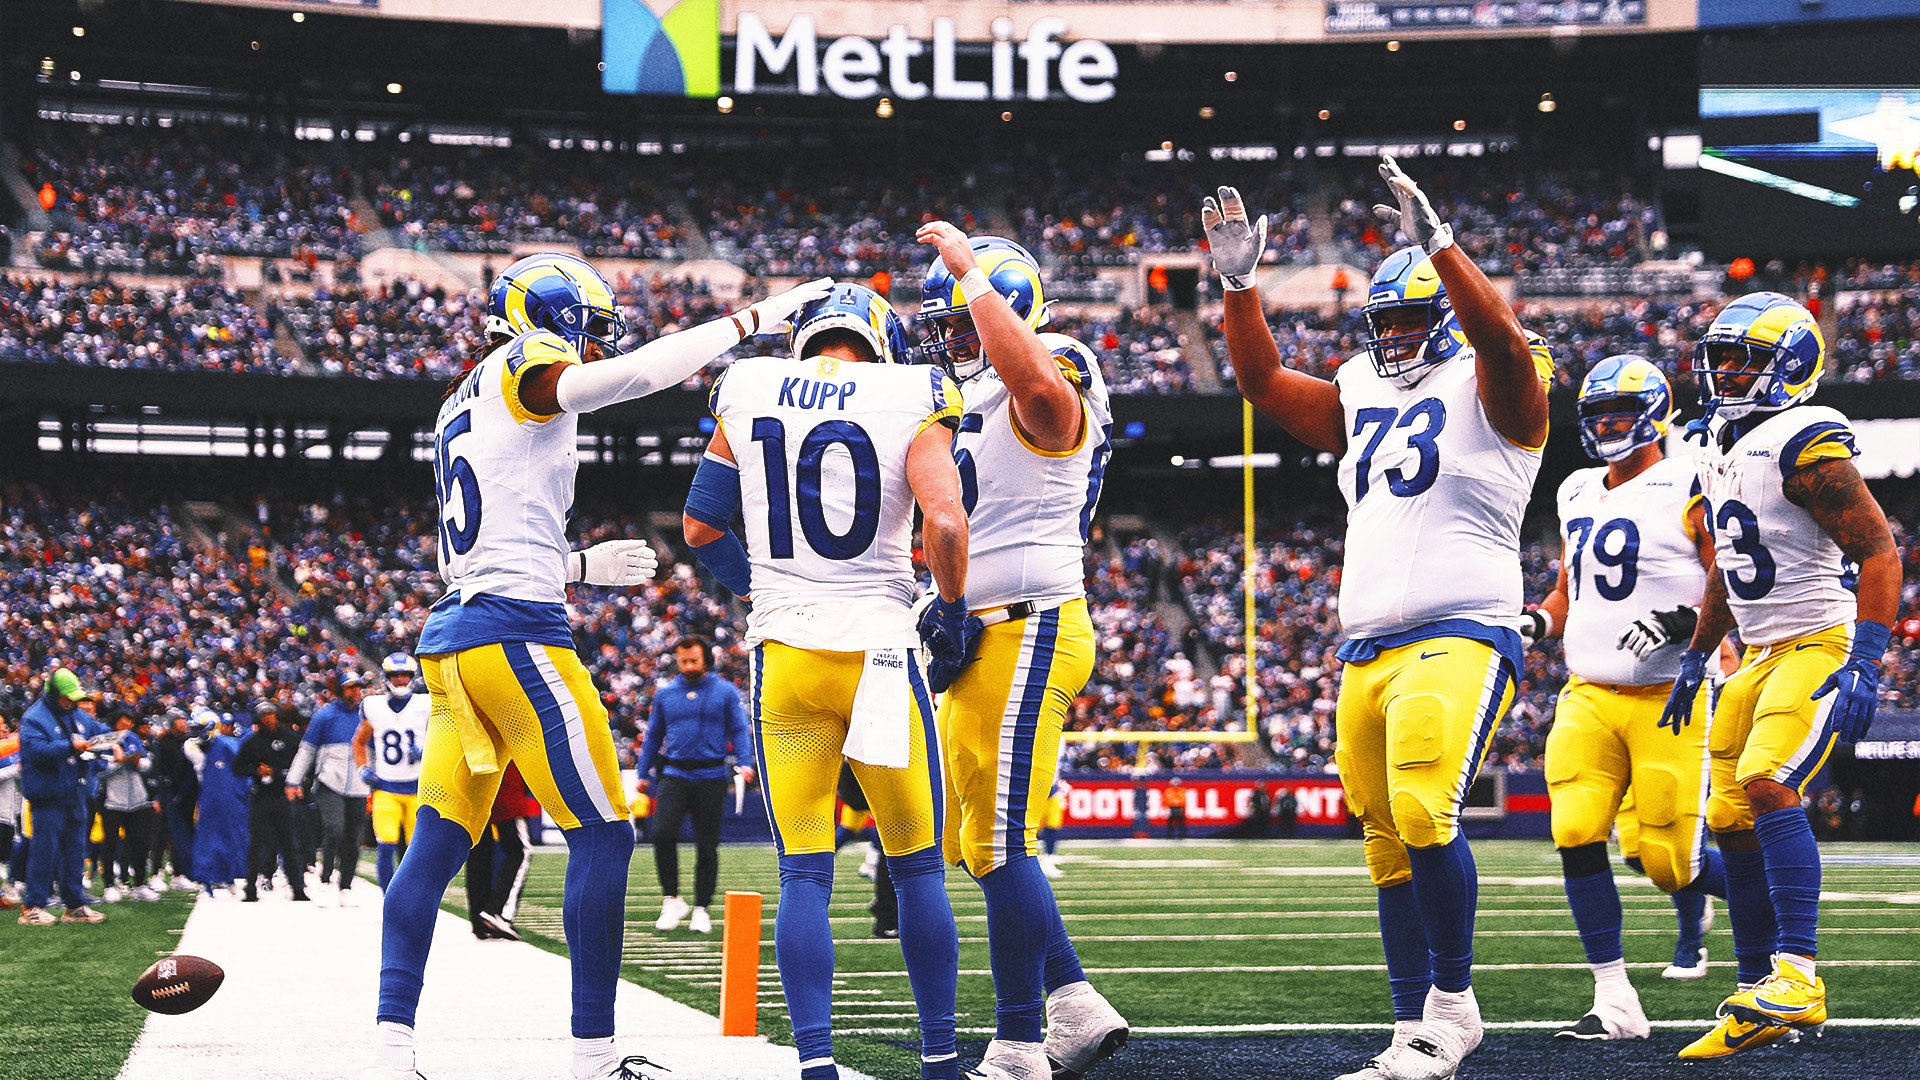 Rams get dramatic 26-25 win over Giants to help stay in NFC playoff picture